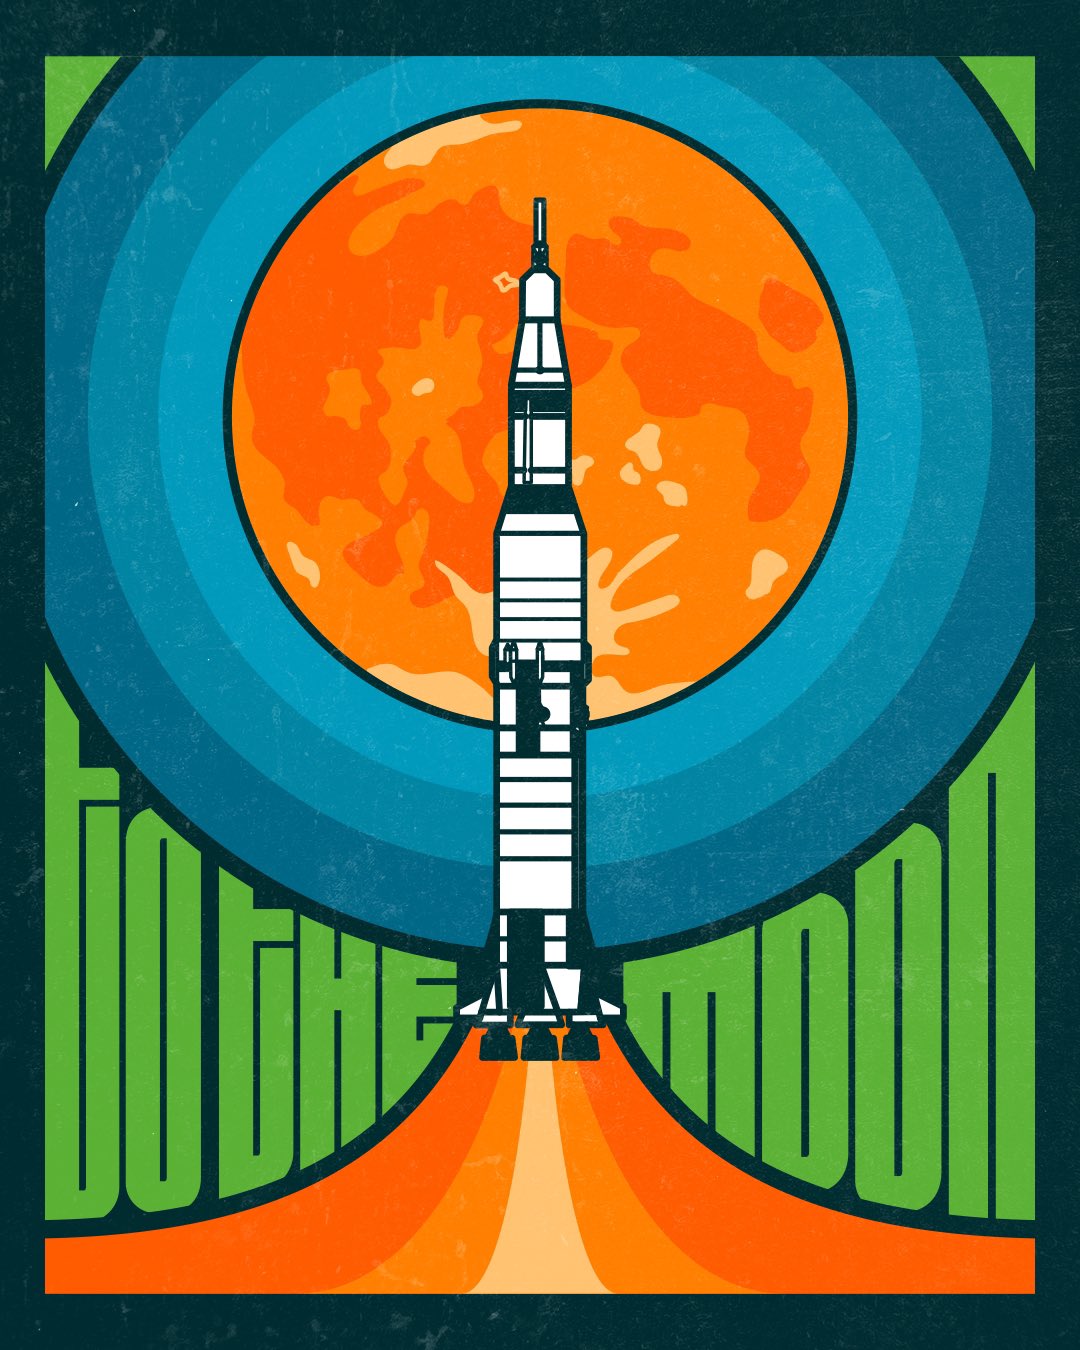 Poster design. Illustration of a Saturn V rocket launching at the center. Behind the rocket at the top is an illustration of the Moon. Surrounding the illustration of the Moon and the Saturn V at the bottom are the words “to the moon”.